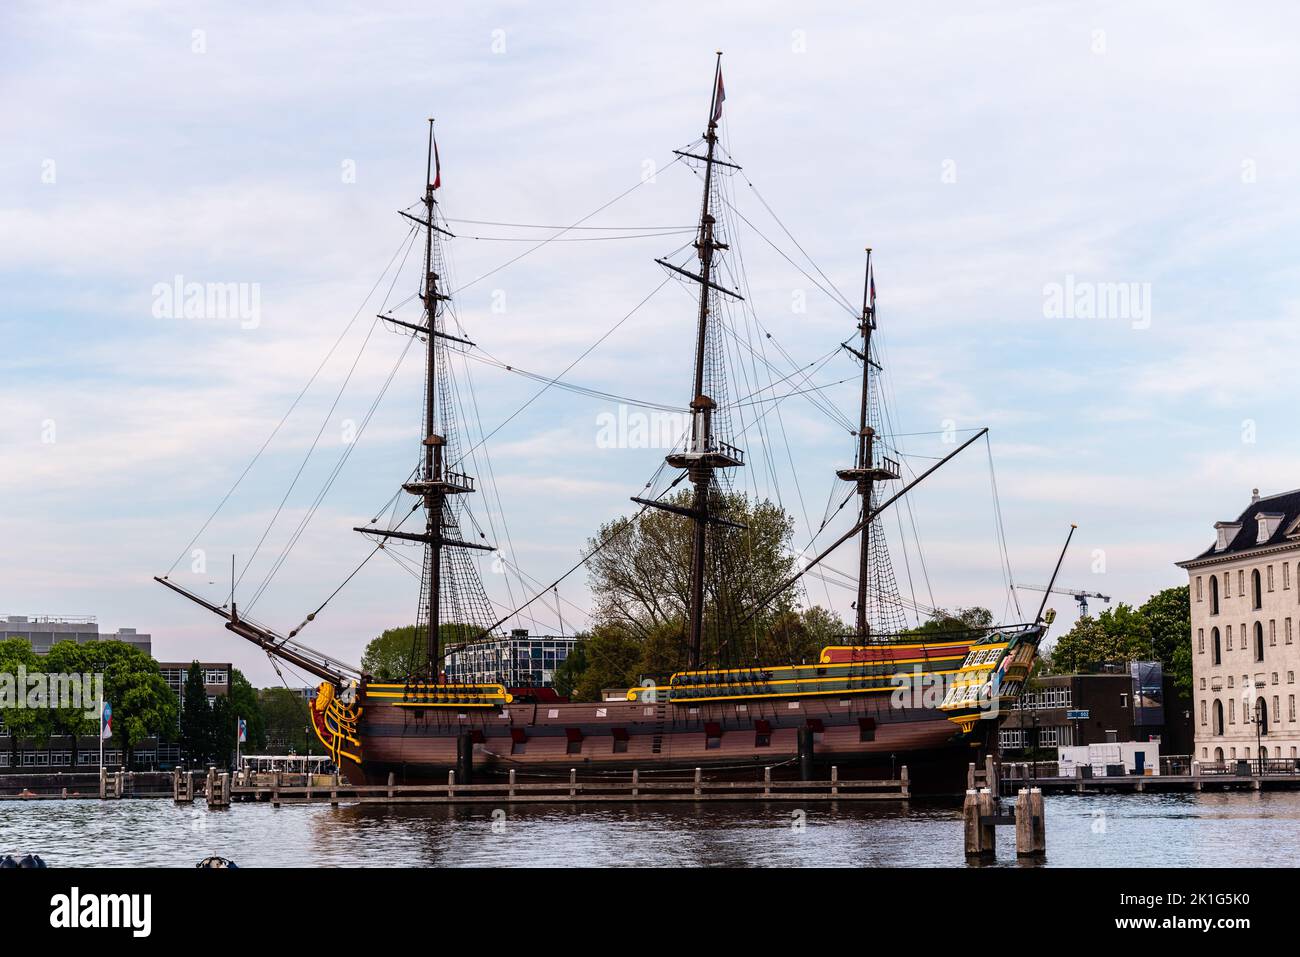 Amsterdam, Netherlands - May 6, 2022: The ship replica in front of the National Maritime Museum Stock Photo